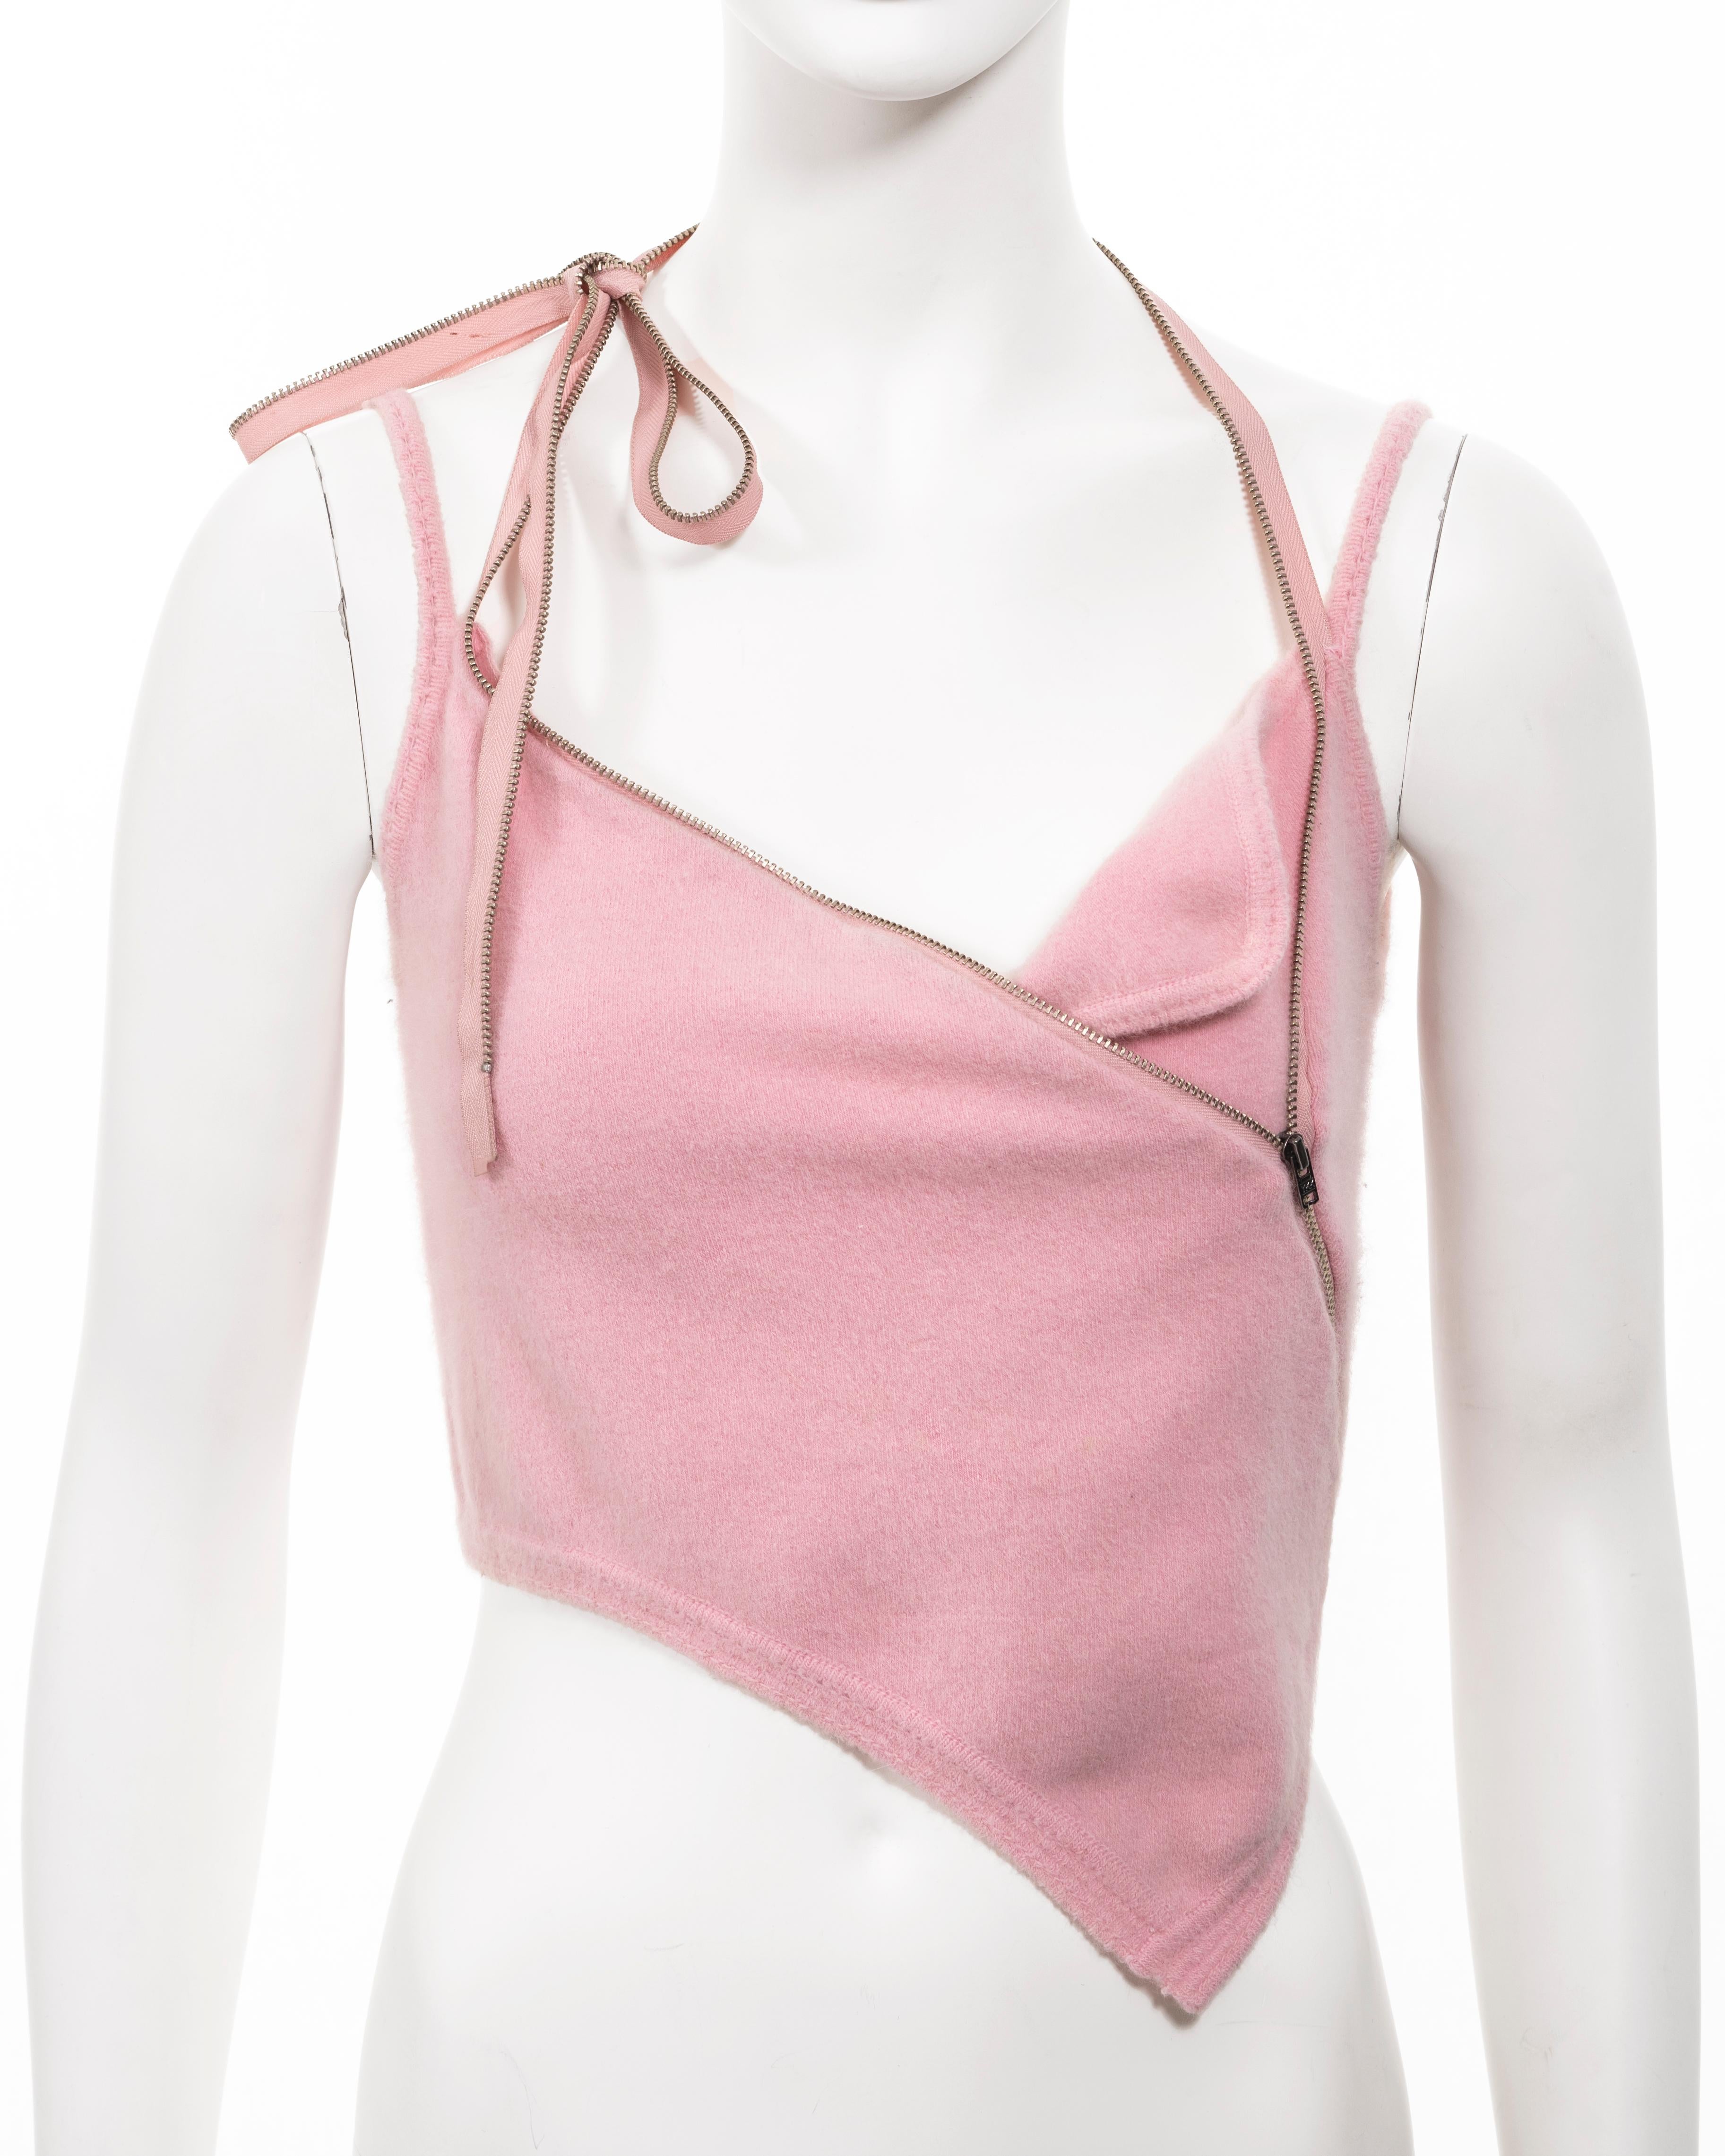 Women's John Galliano baby pink fuzzy knitted crop top with zippers, ss 2000 For Sale